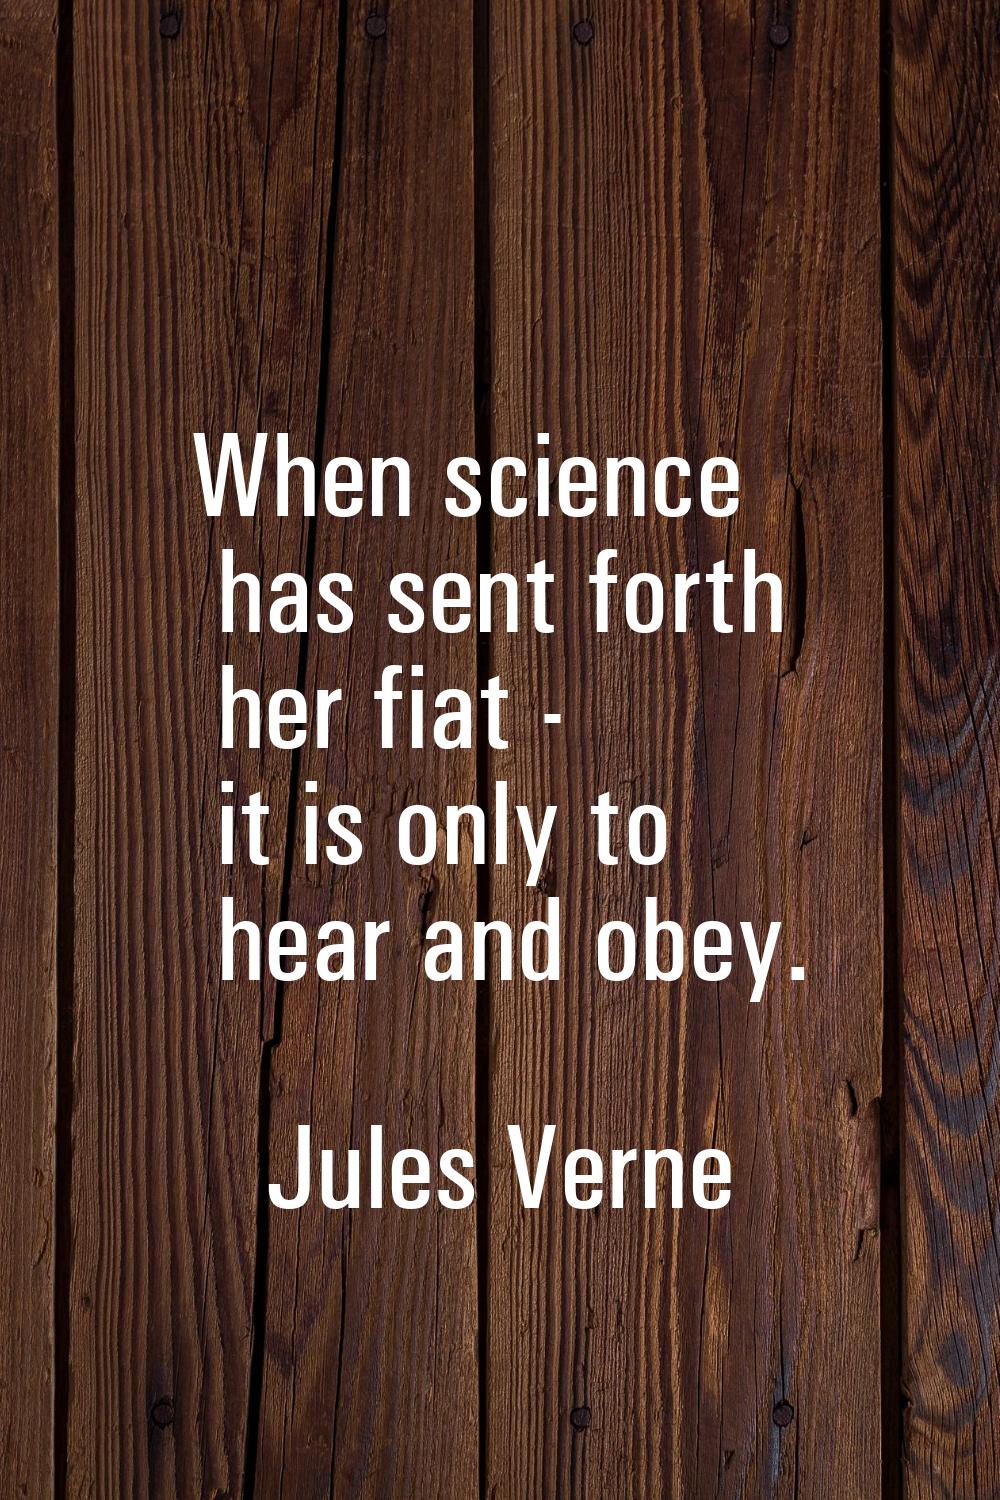 When science has sent forth her fiat - it is only to hear and obey.